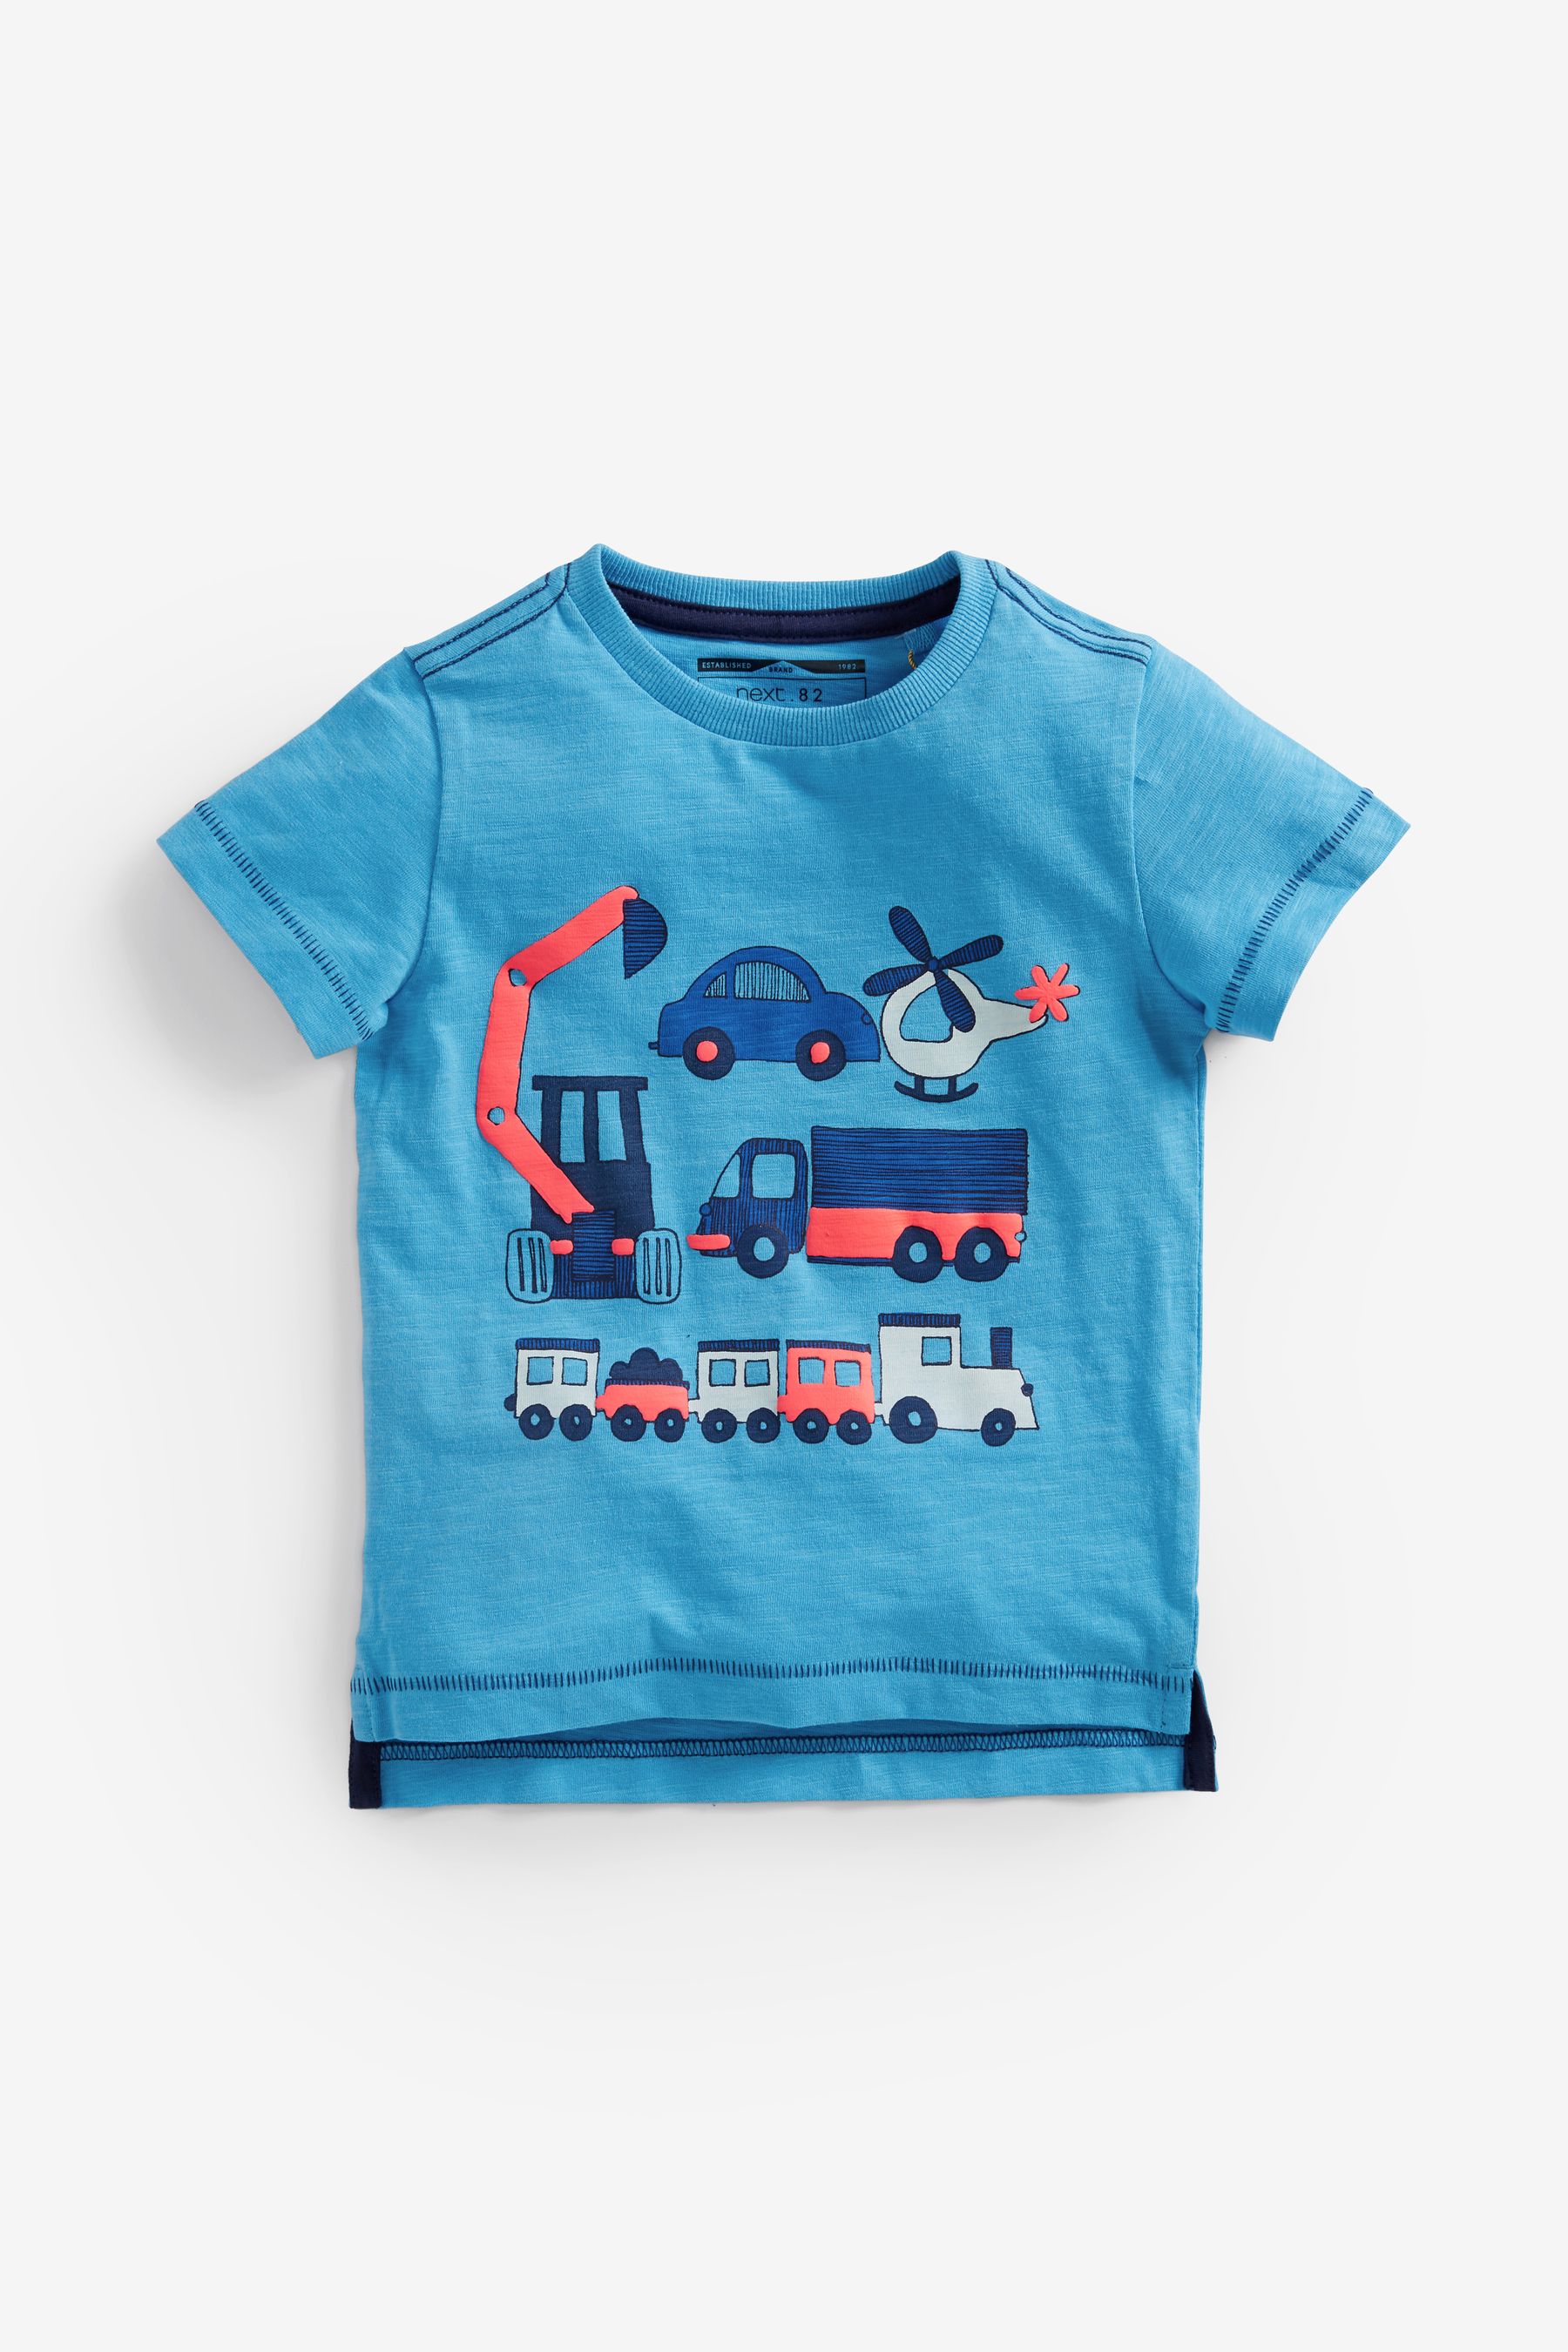 Buy Blue Transport Short Sleeve T-Shirt 5 Pack (3mths-7yrs) from the ...